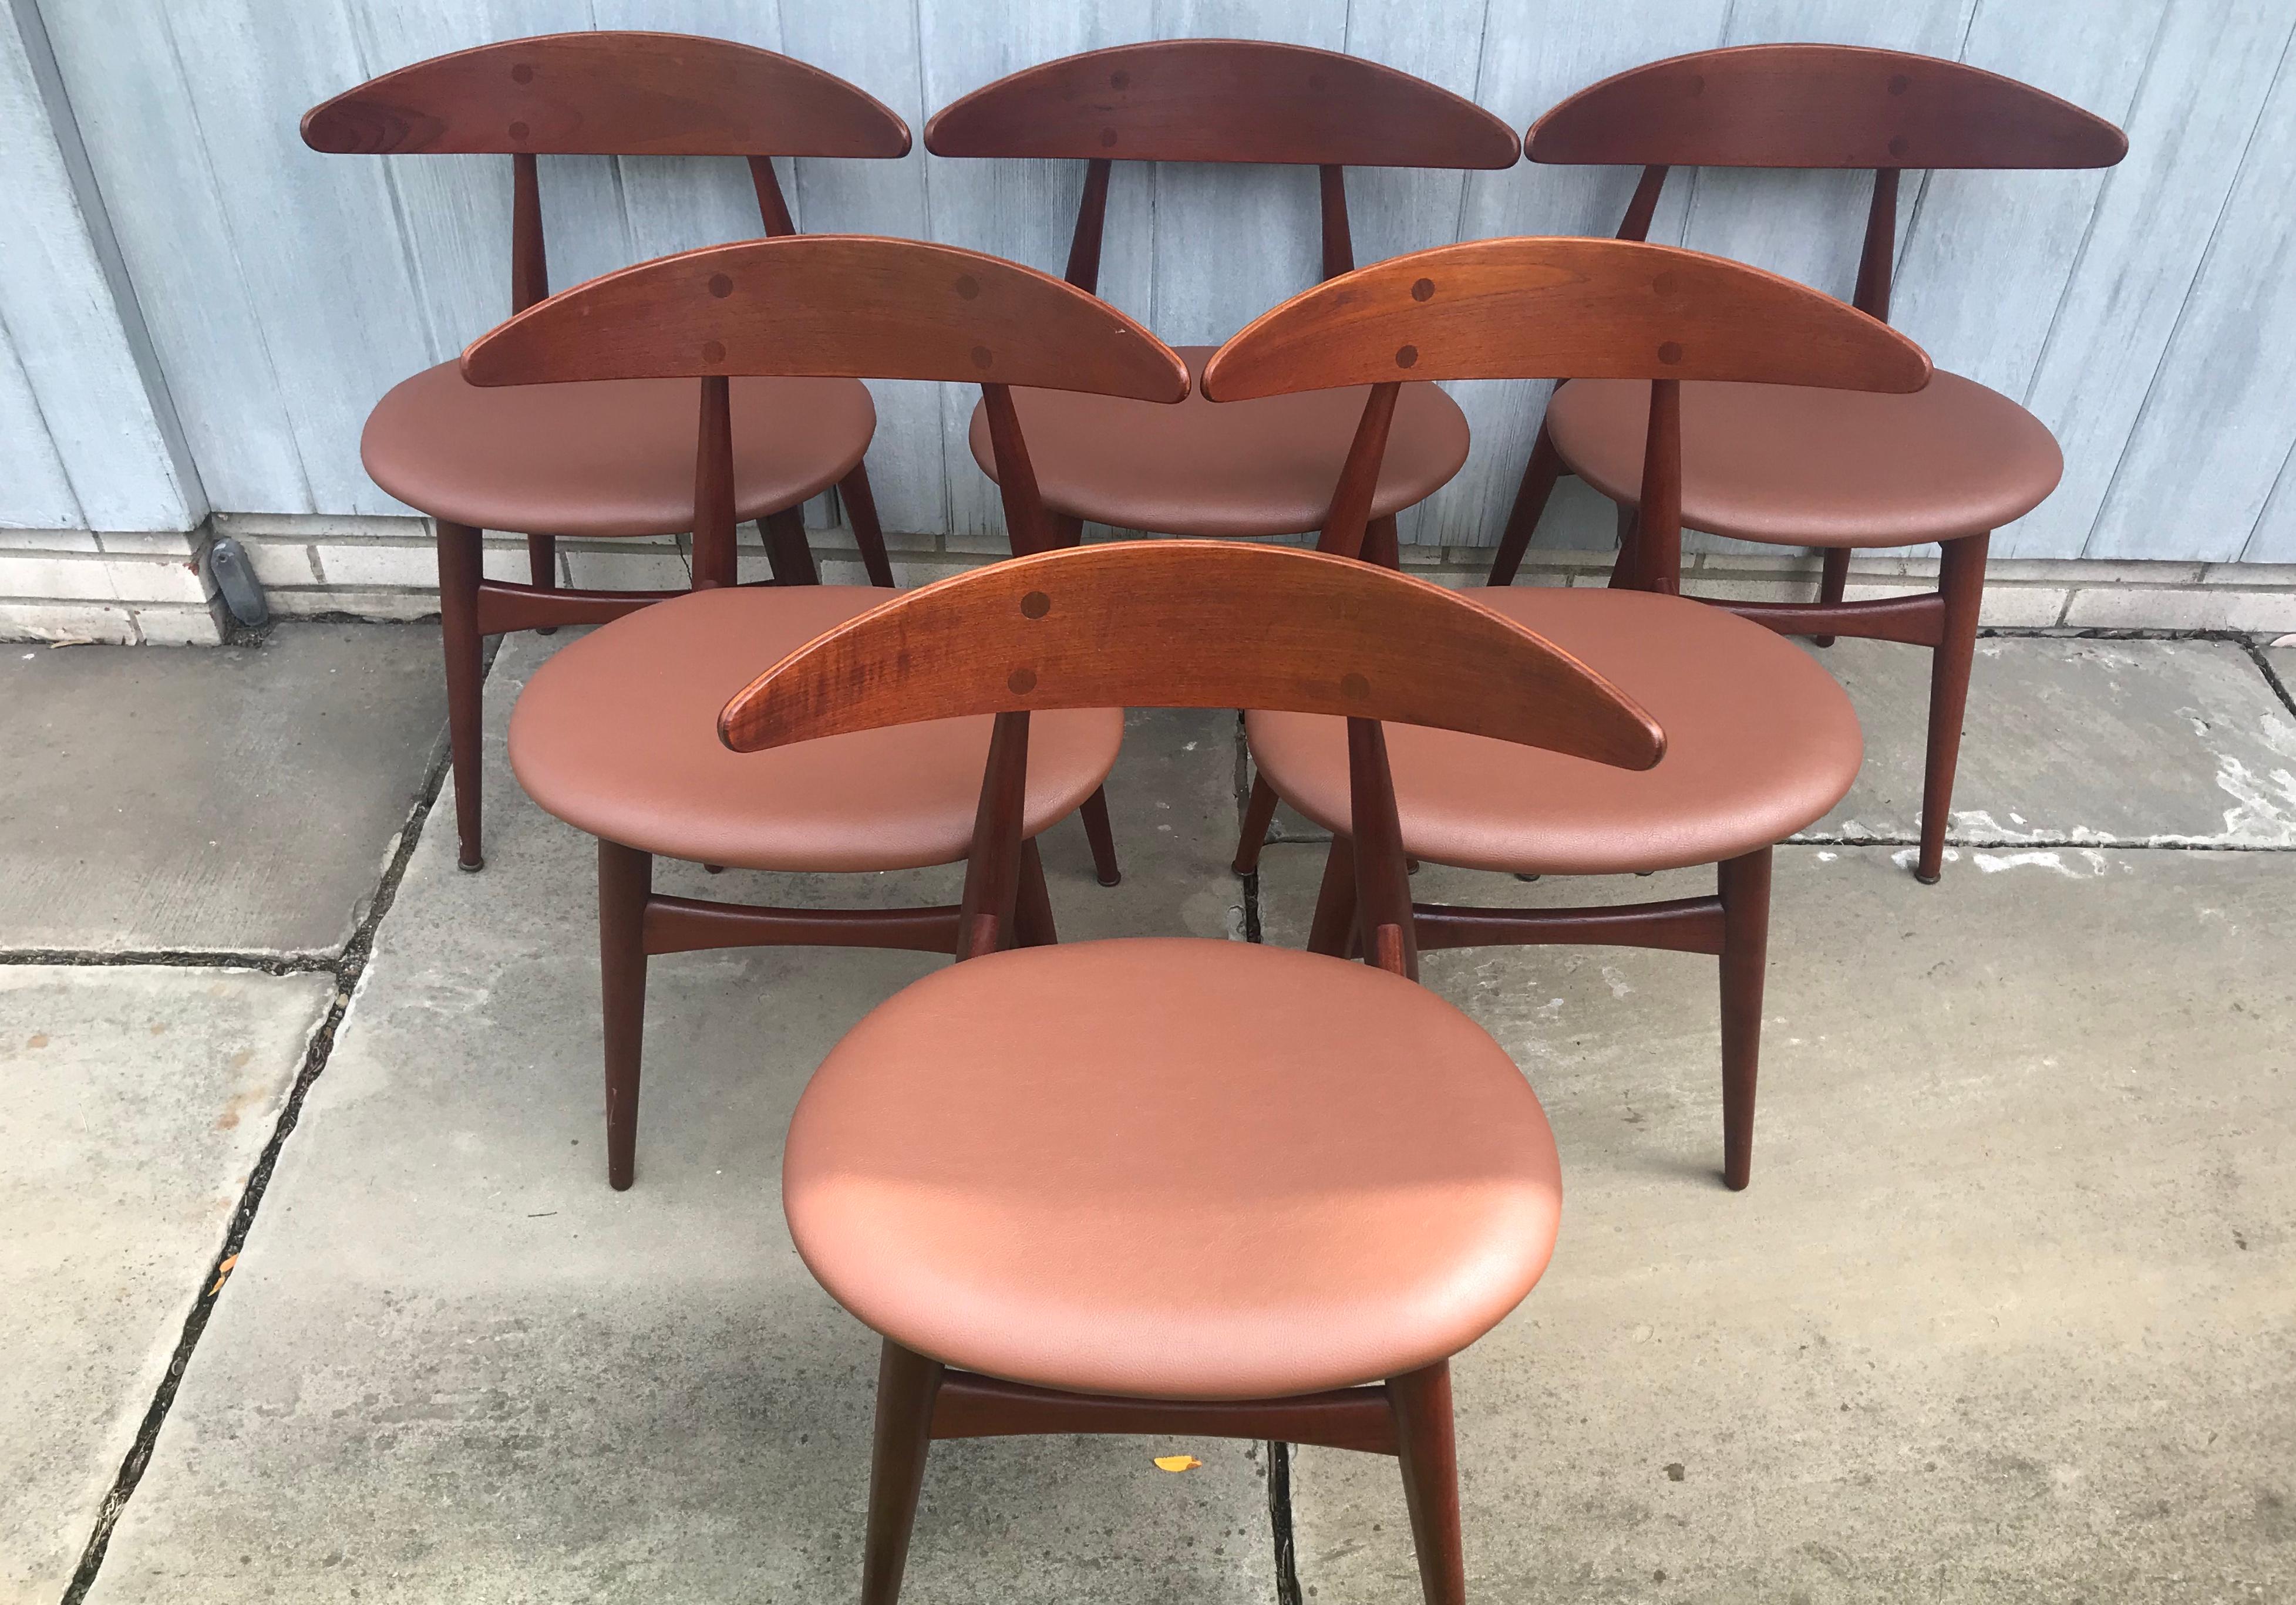 Beautiful set of 6 teak dining chairs in teak. Model CH33 chairs, in teak and reupholstered in Maharam “lariat” vegan leather color “russet” textile. Deep brilliant color and sculpturally formed frame.